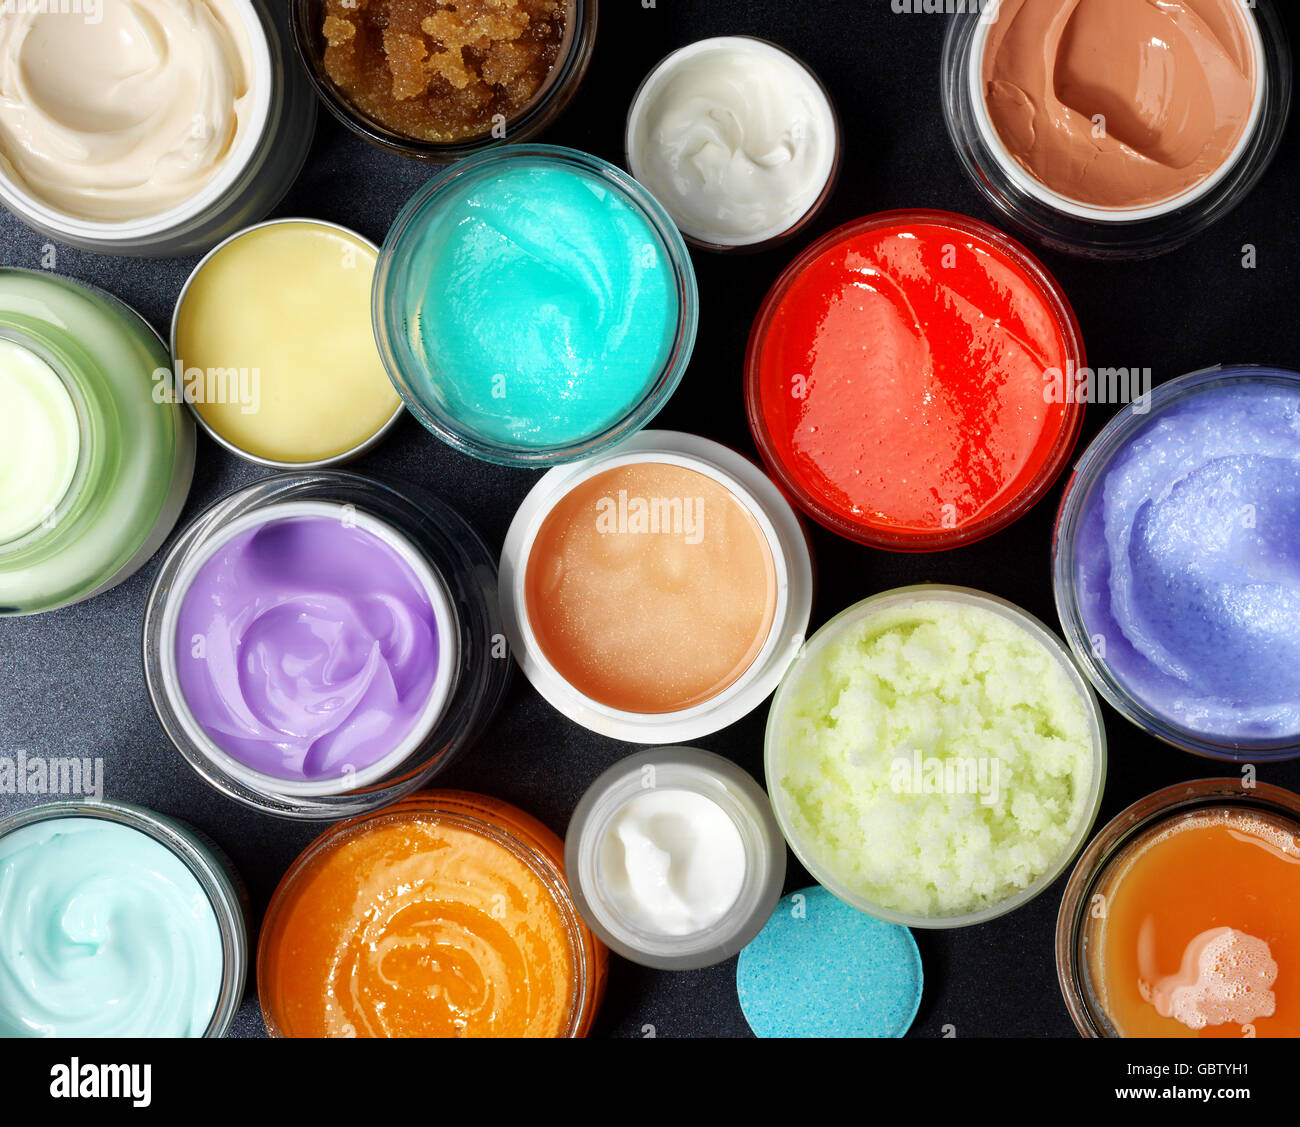 Sudio shot of colorful scrubs and creams. View from above. Stock Photo